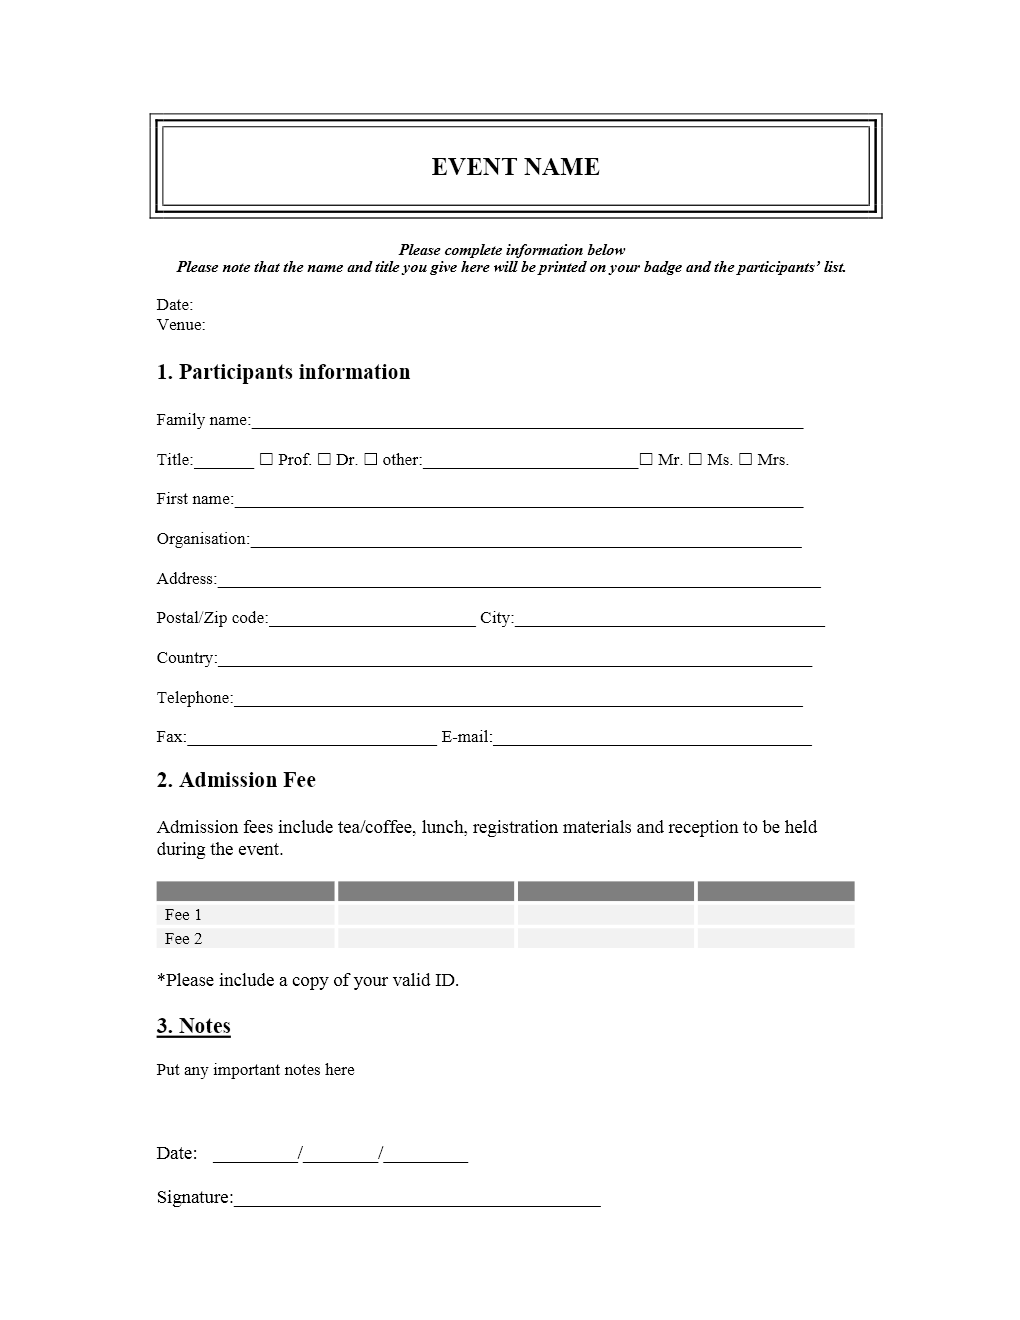 conference registration forms template word   April.onthemarch.co